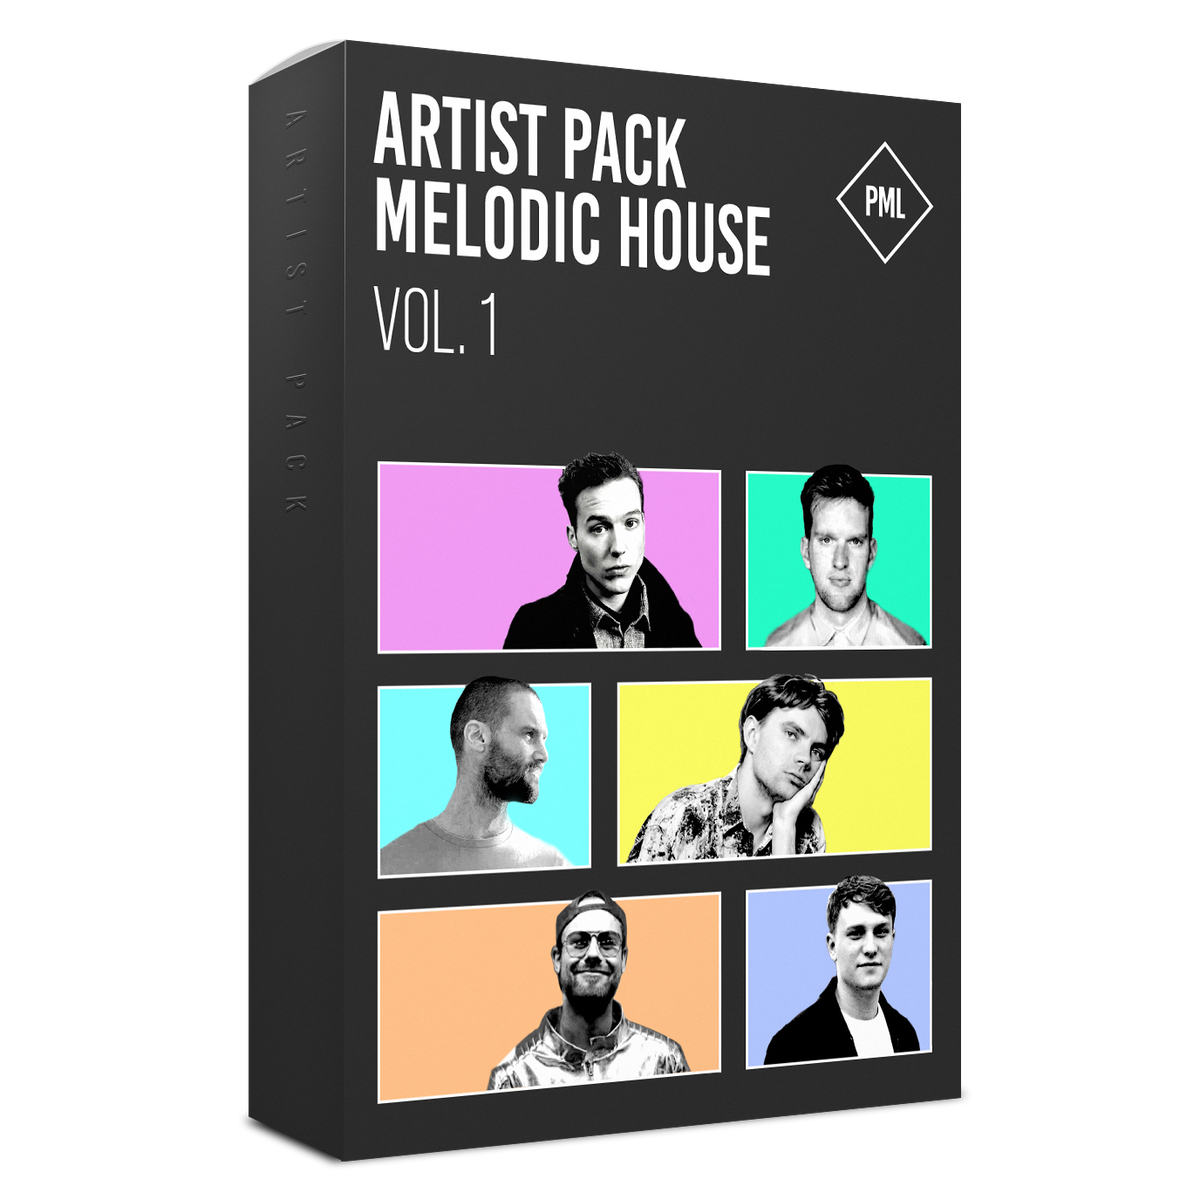 Artist Pack Vol. 1 - Melodic House Product Box